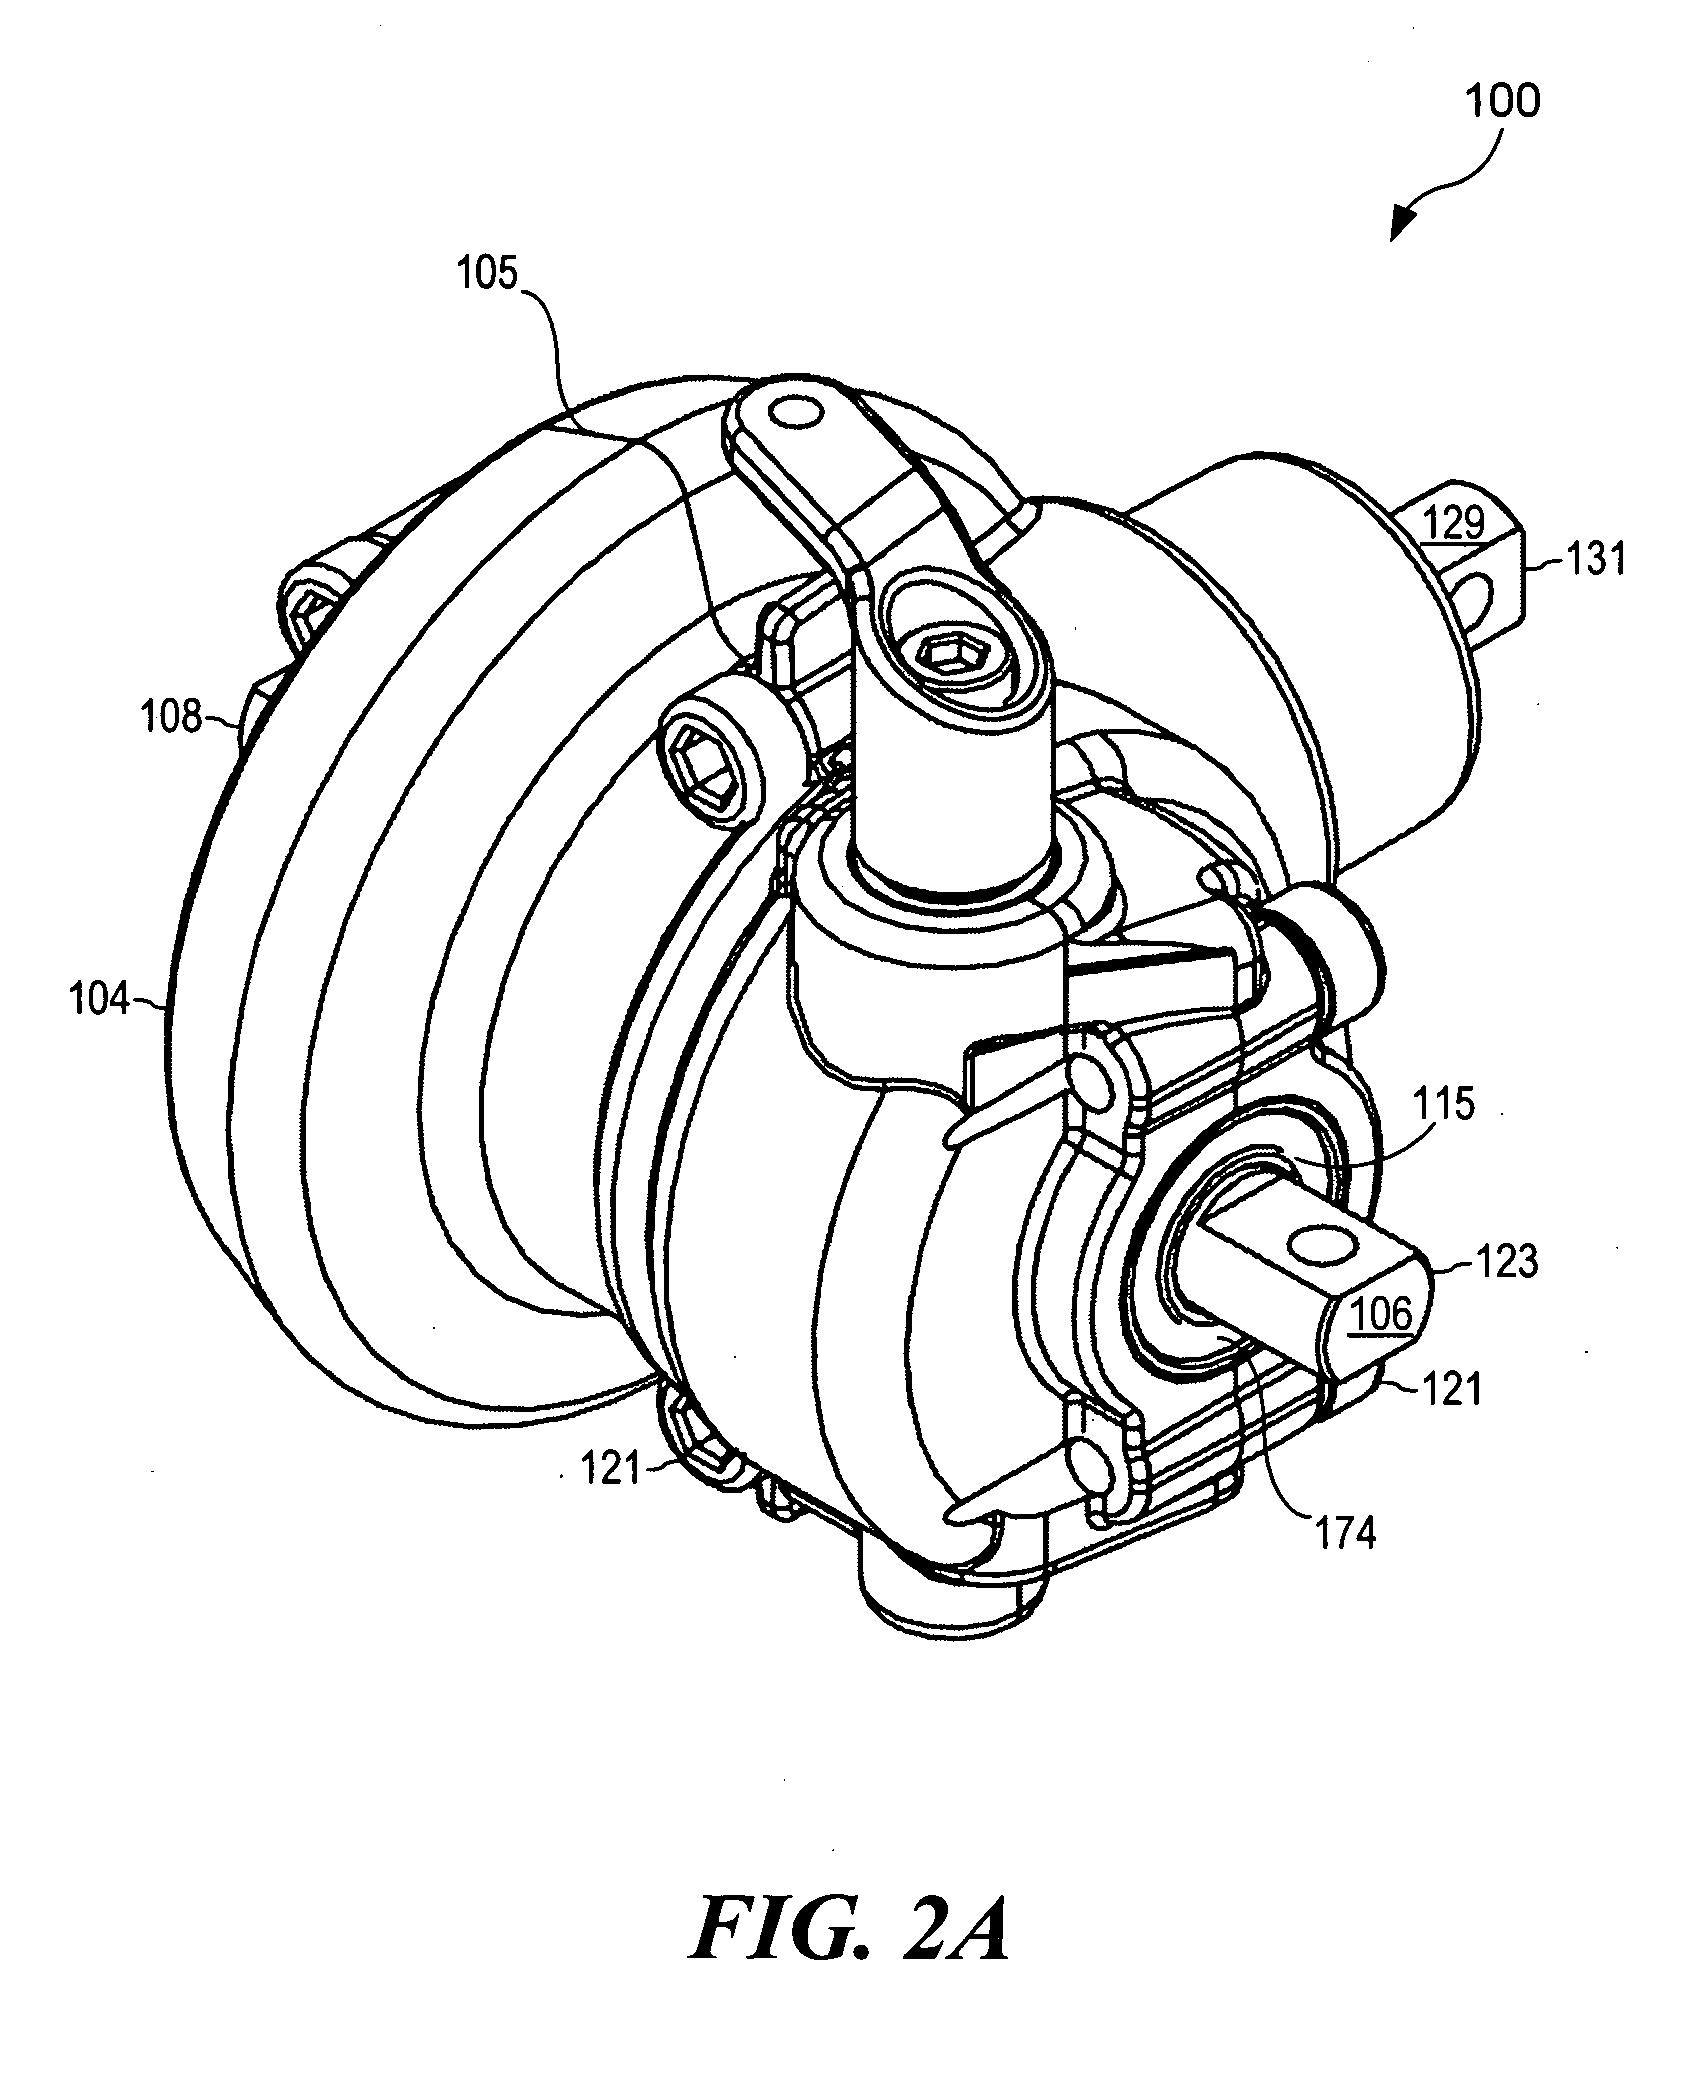 Locking differential assembly for a model vehicle